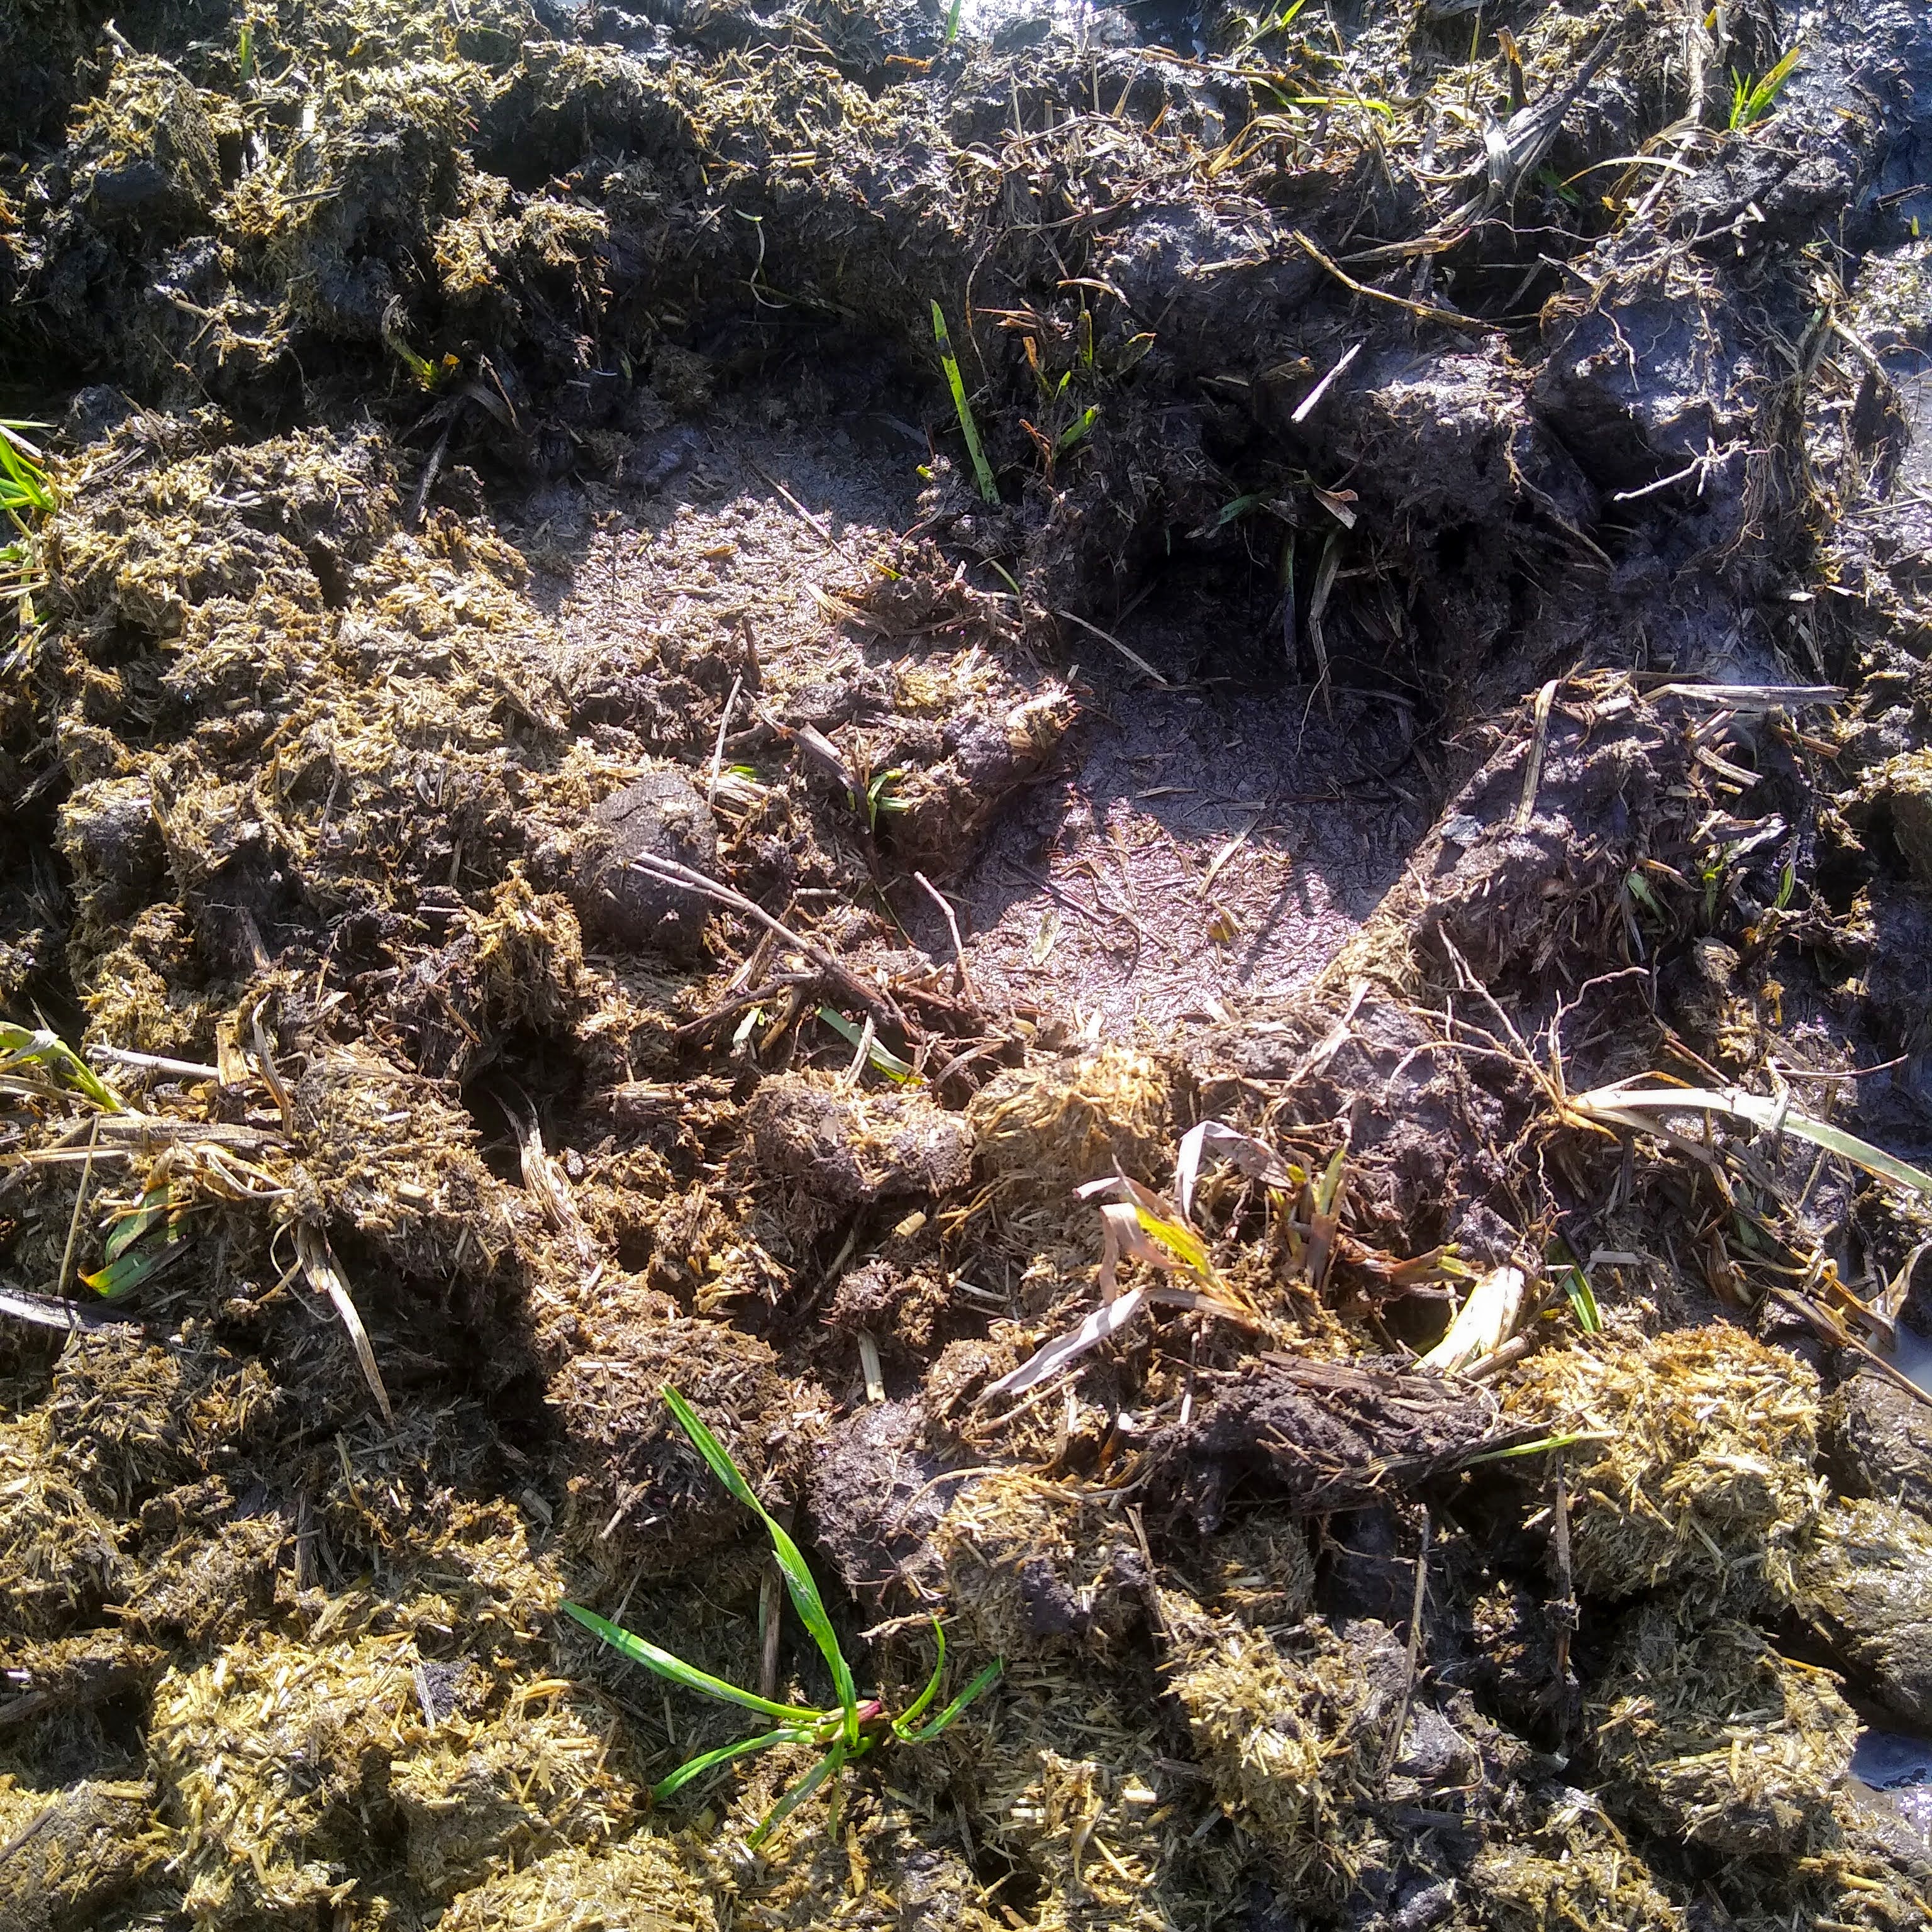 Mud that is bad for horses with manure and urine mixed into the soil.